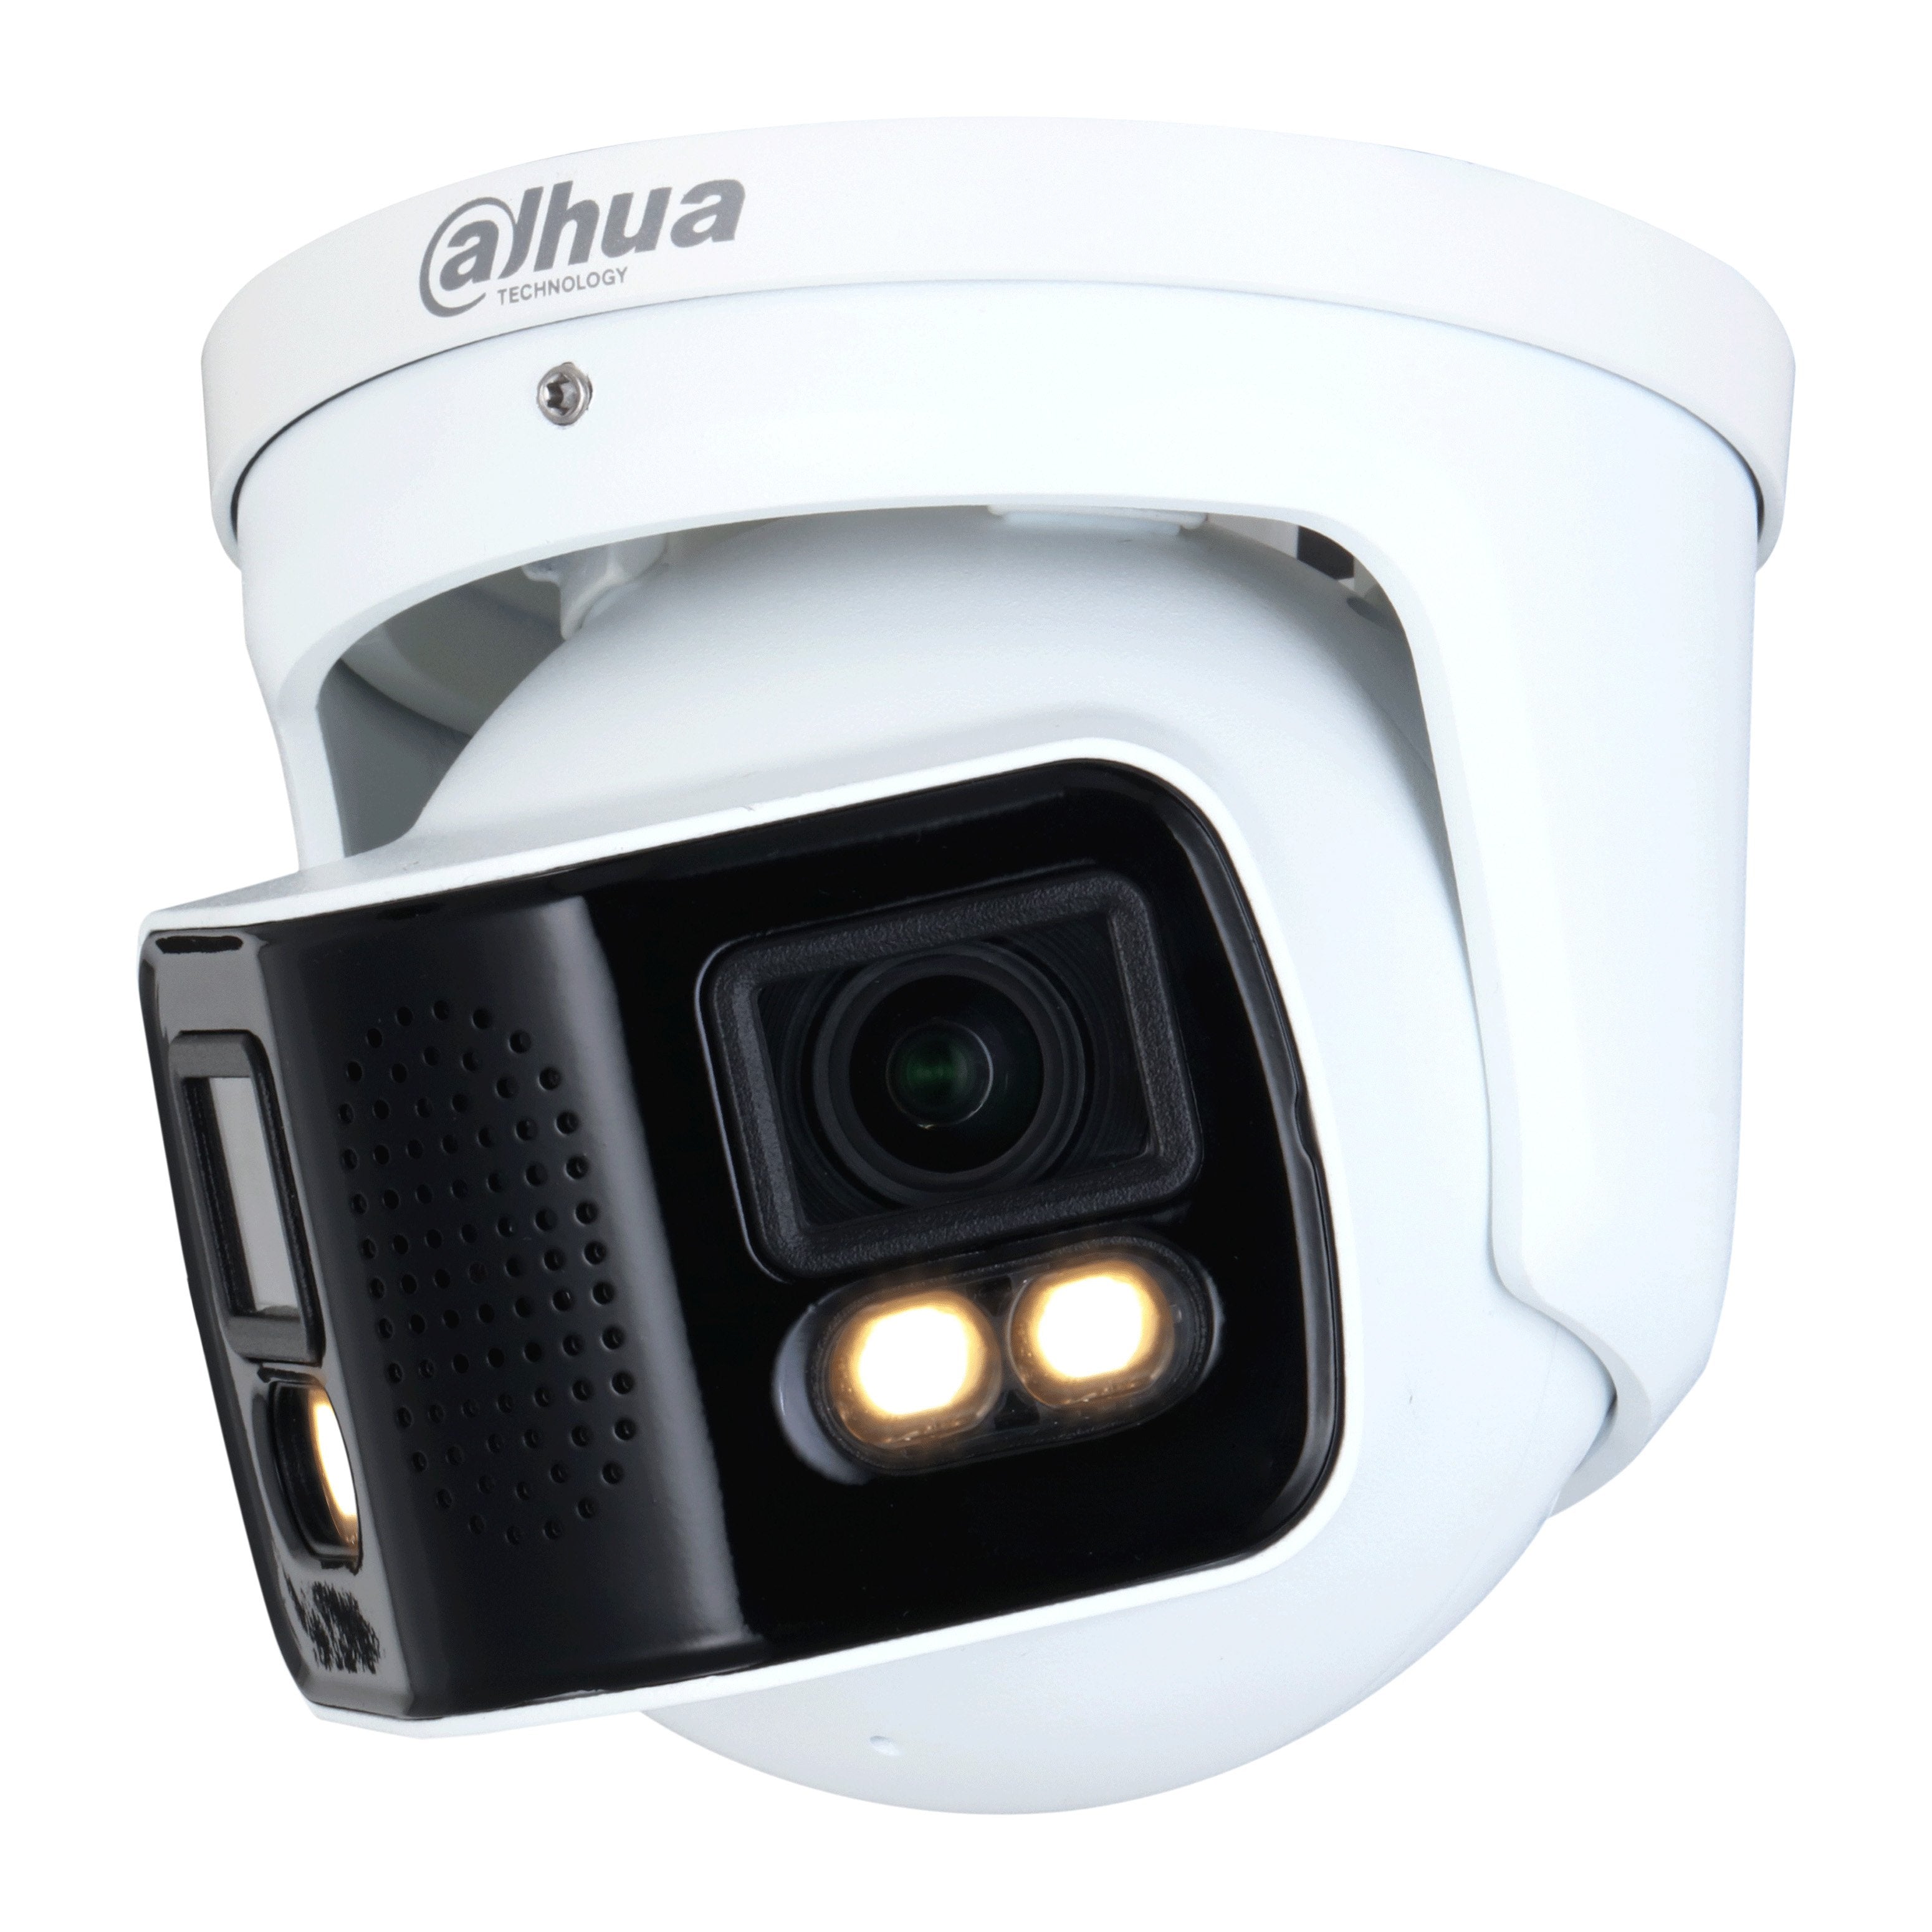 Dahua 2 x 4MP IP WizMind AI Series Full Colour 180 Degree Wide Angle Turret Camera, SMD, Perimeter, People Counting, 140dB WDR, 40m White Light, ePOE / 12VDC, IP67, MicroSD, Built-in Mic / Speaker, EPTZ (Wall Mount: PFB203W, Junction Box: PFA137)